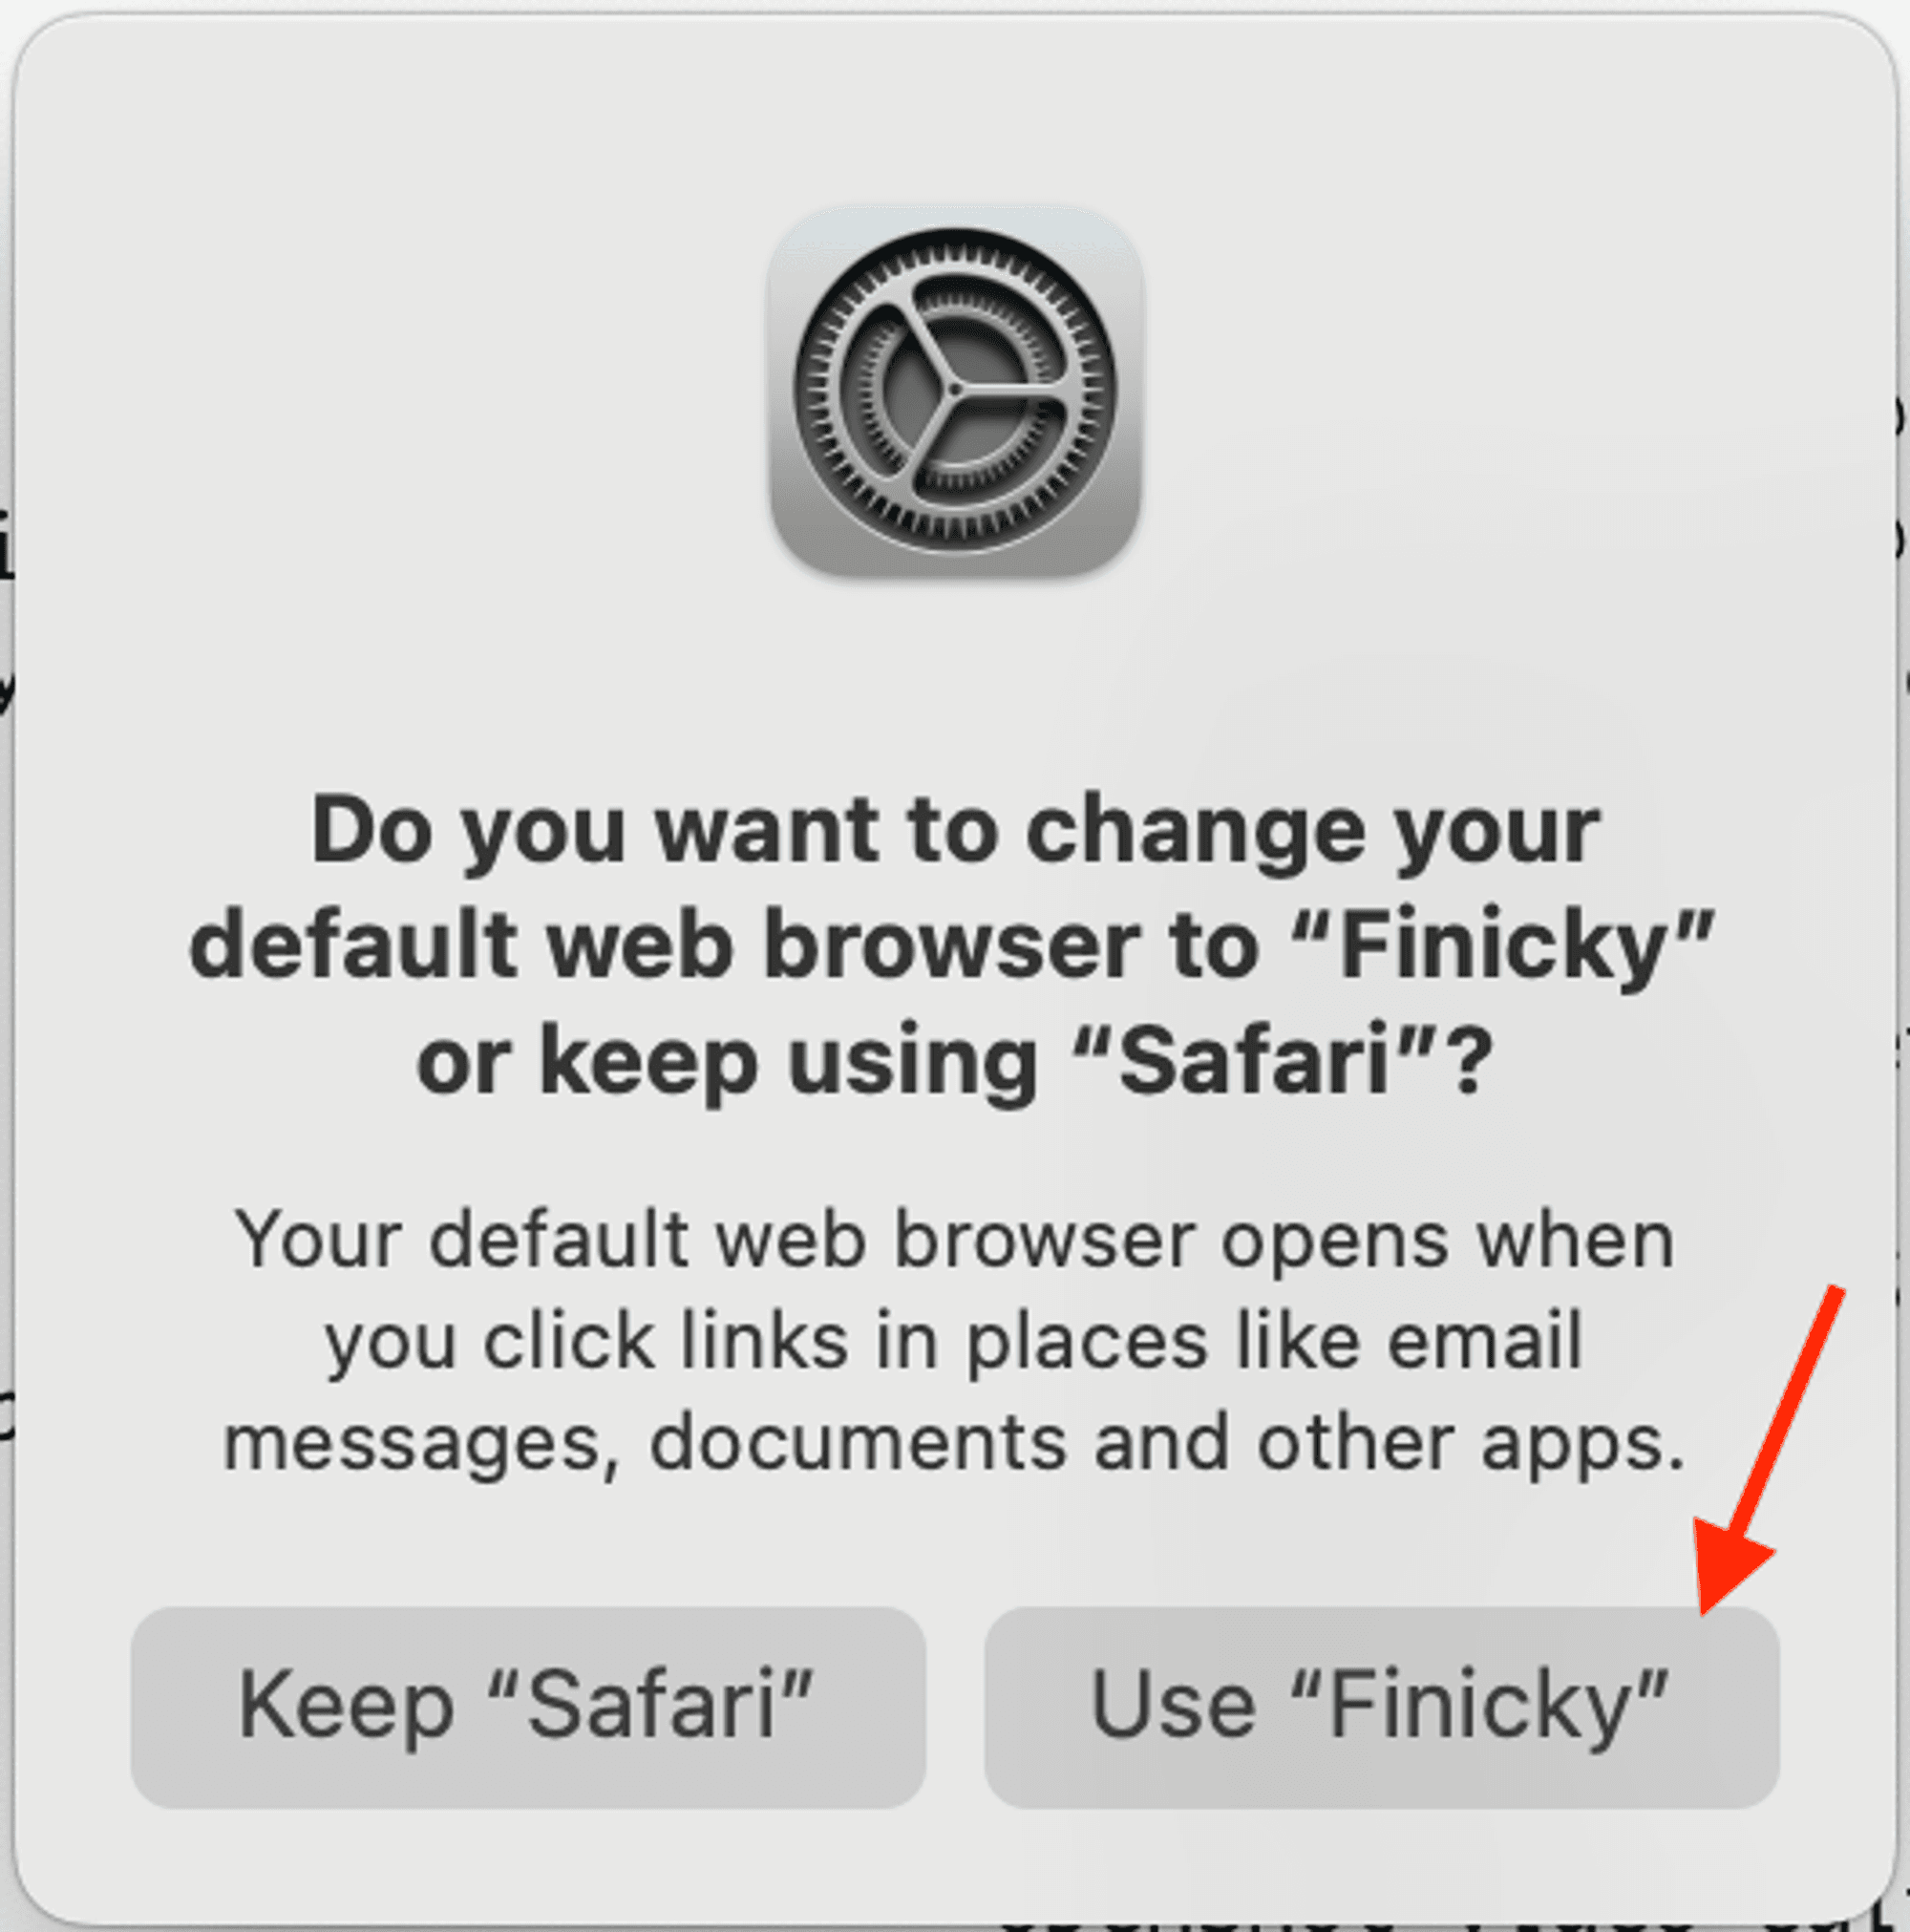 When prompted allow Finicky to be your default browser